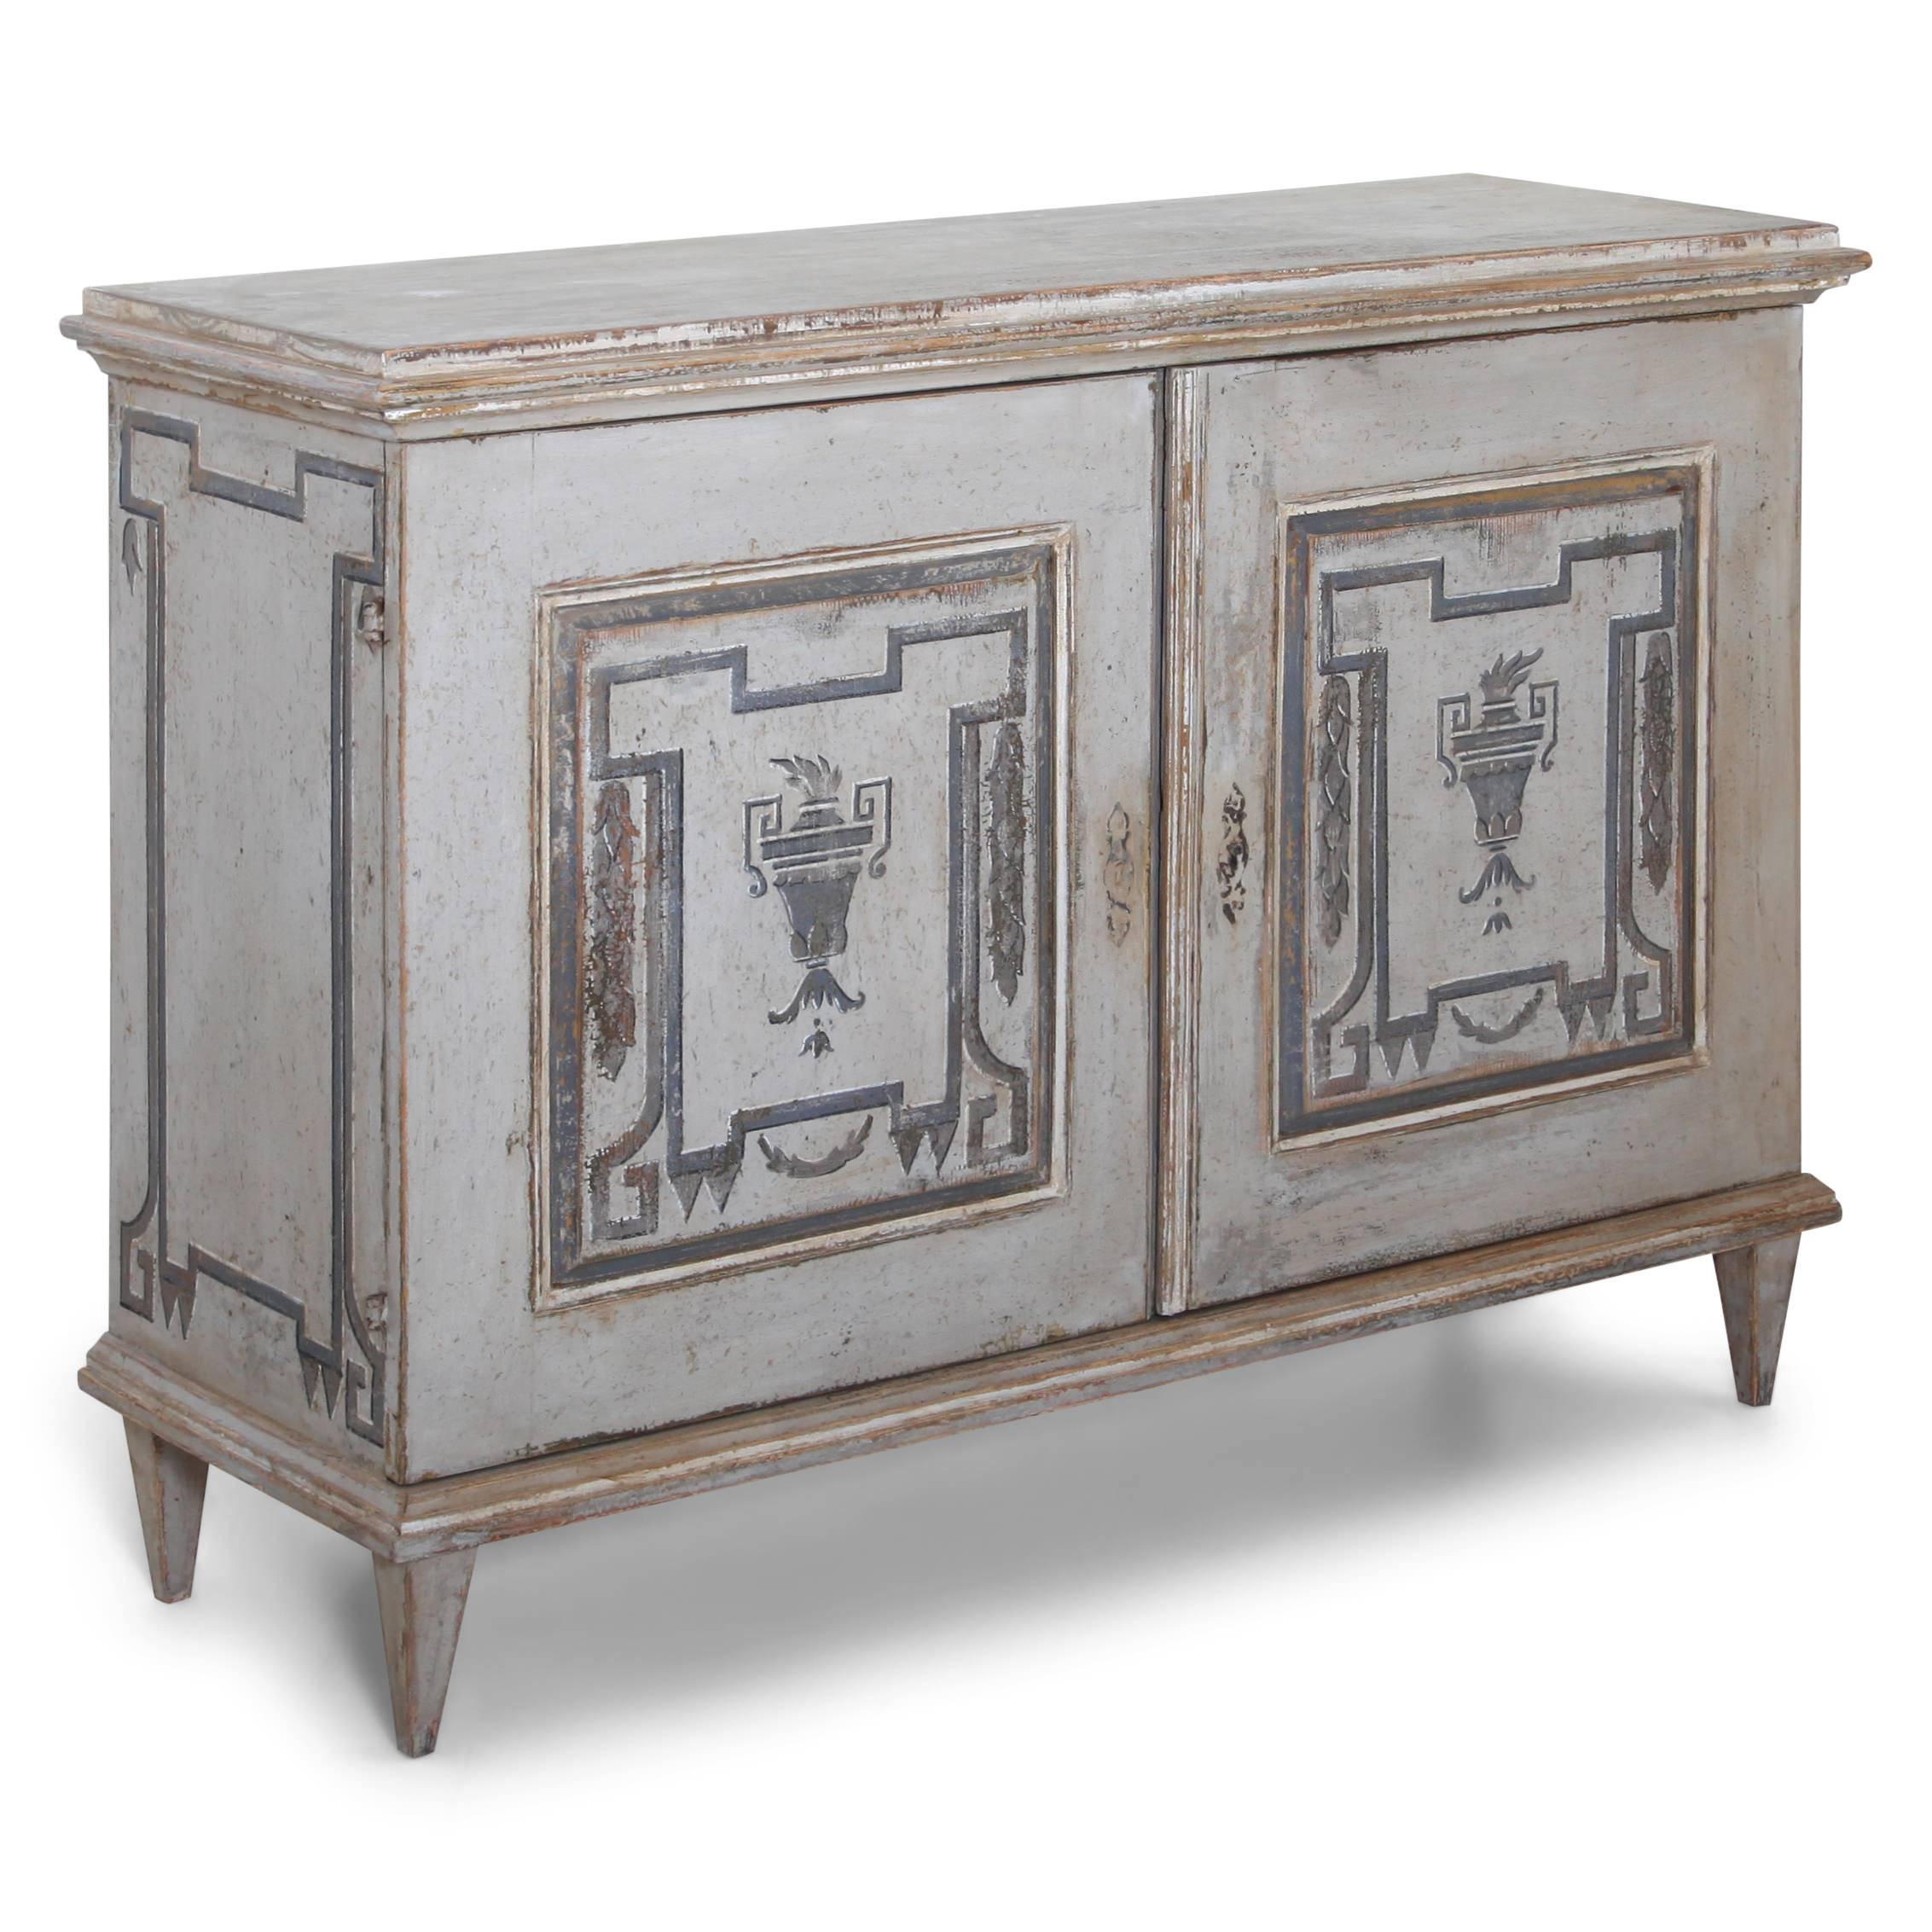 Two-doored sideboard on tapered feet. The interior shows square compartments for lots of bottles. The grey paint with dark grey ornaments on the sides and doors is new and the legs were replaced.